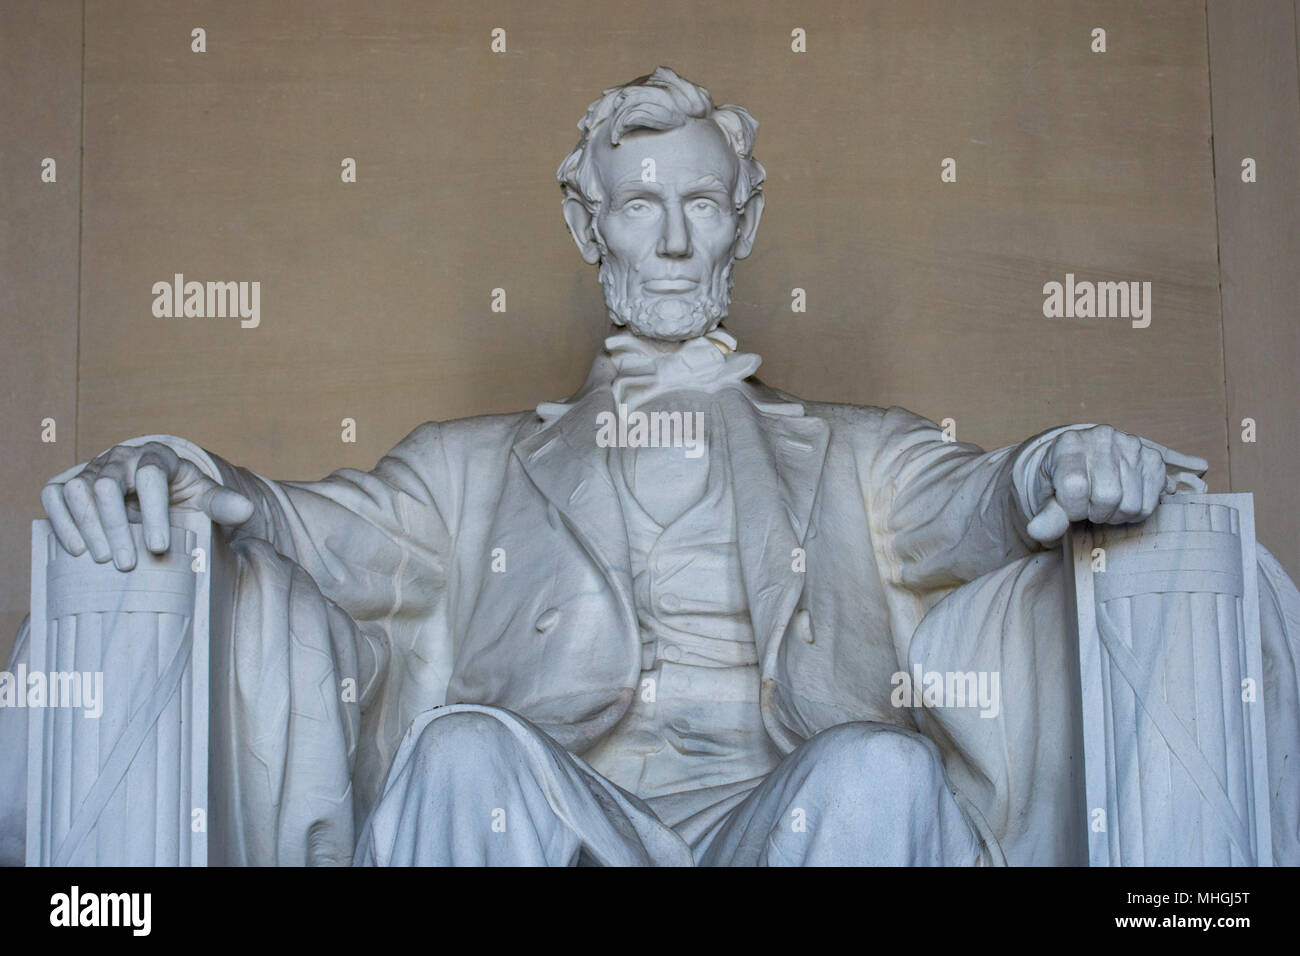 Medium close up view of the iconnic sculpture of Abraham Lincoln by sculptor Daniel Chester French, at the Lincoln Memorial in Washington, DC. Stock Photo